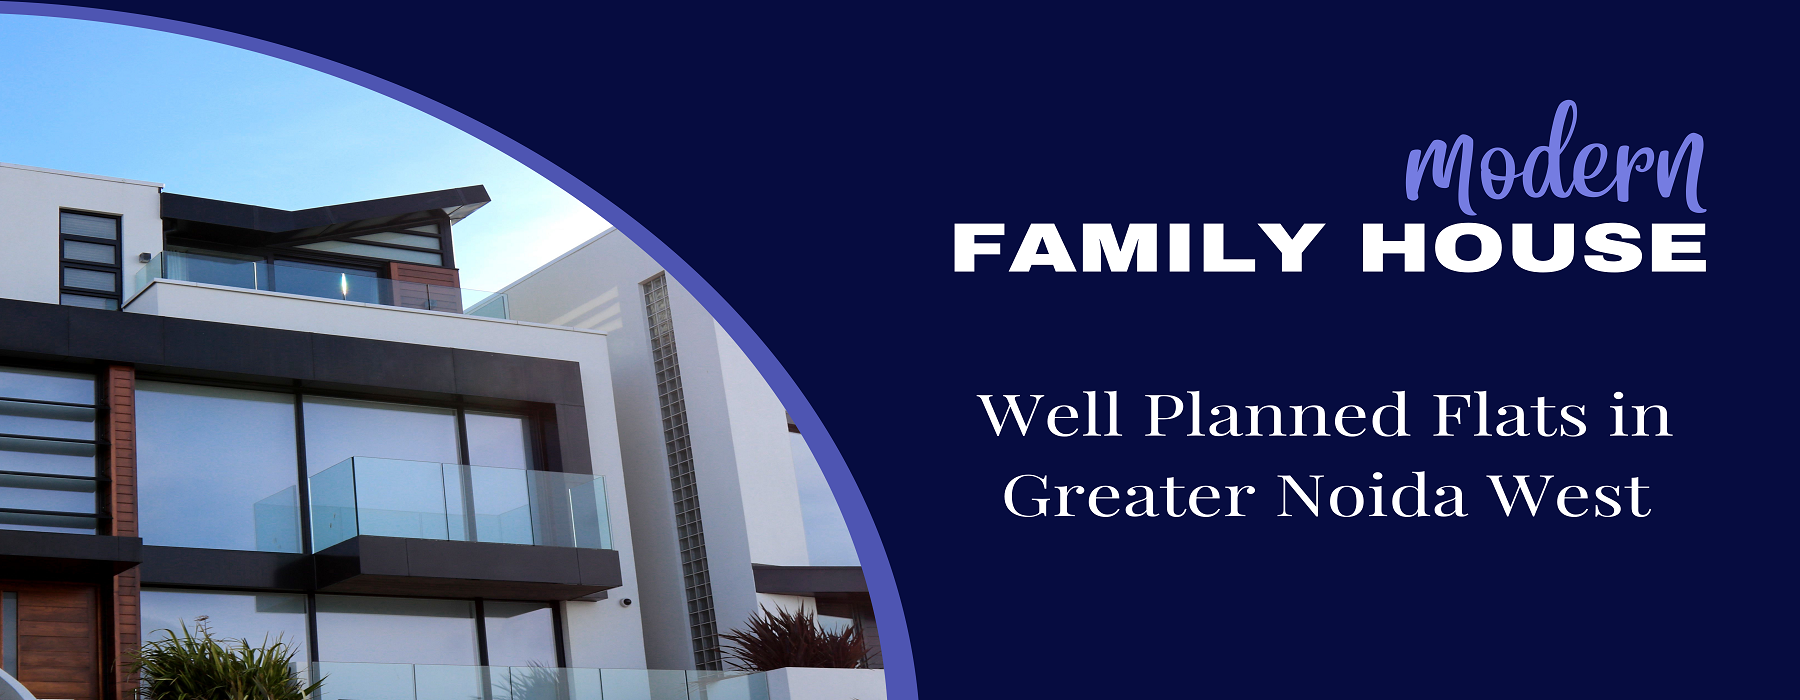 Looking for Buy Well Planned Flats in Greater Noida West